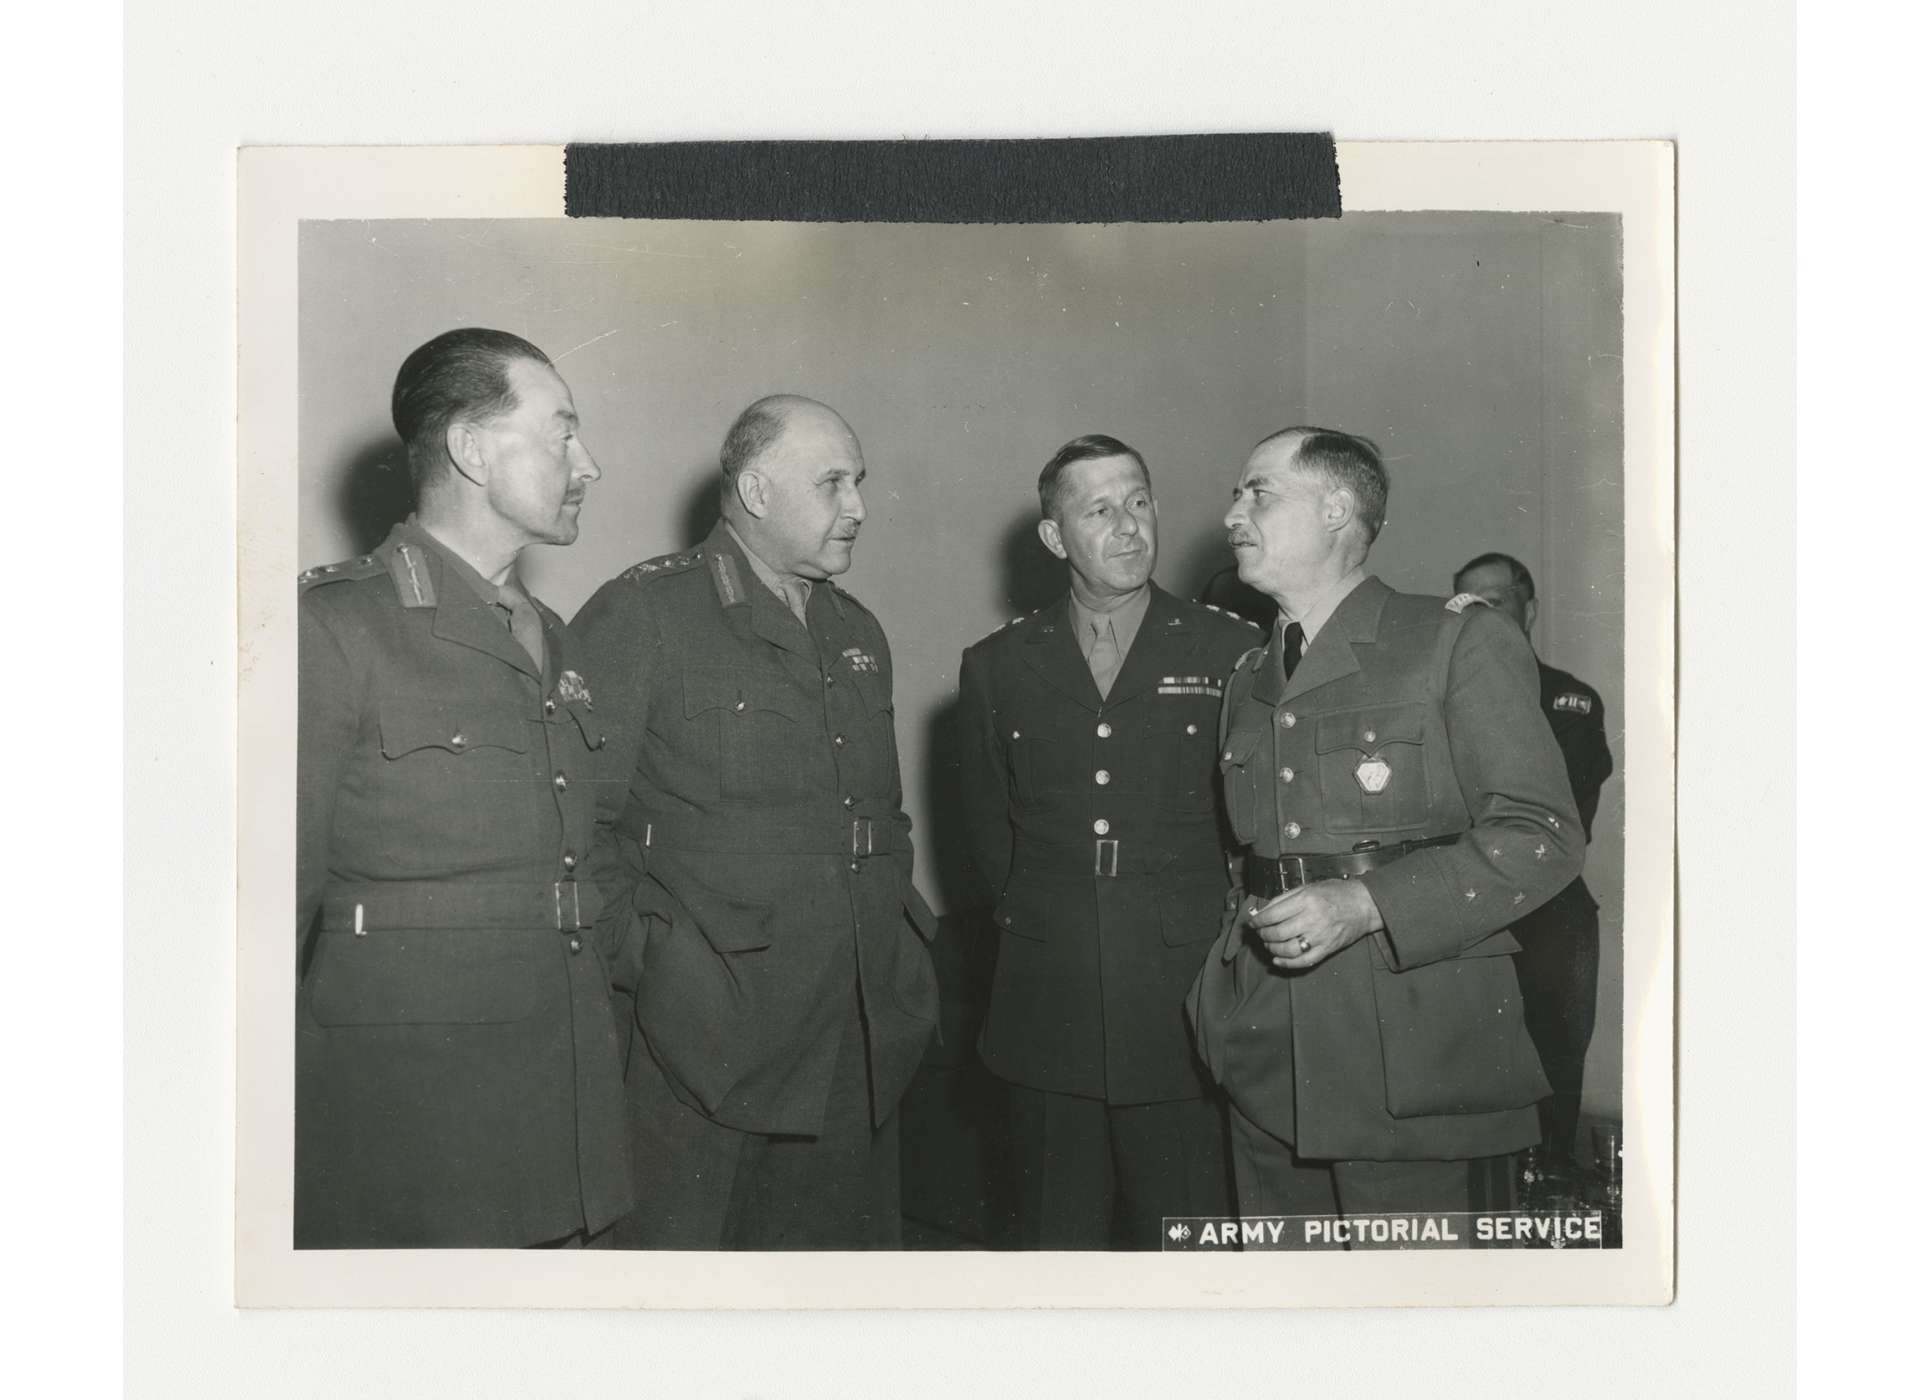 Meeting between, from left to right, British General Sir Harold Alexander, Commander in Chief of Allied Armies in Italy, British General Sir Henry Maitland Wilson, Supreme Allied Commander, Mediterranean Theater, US Lieutenant General Jacob Devers, Deputy Supreme Commander, Mediterranean Theater, and General Alphonse Juin, Commander of the Free French Expeditionary Corps, April 25, 1944. US Army Signal Corps photo, gift from Ms. Regan Forrester, from the Collection of The National WWII Museum, 2002.337.505.